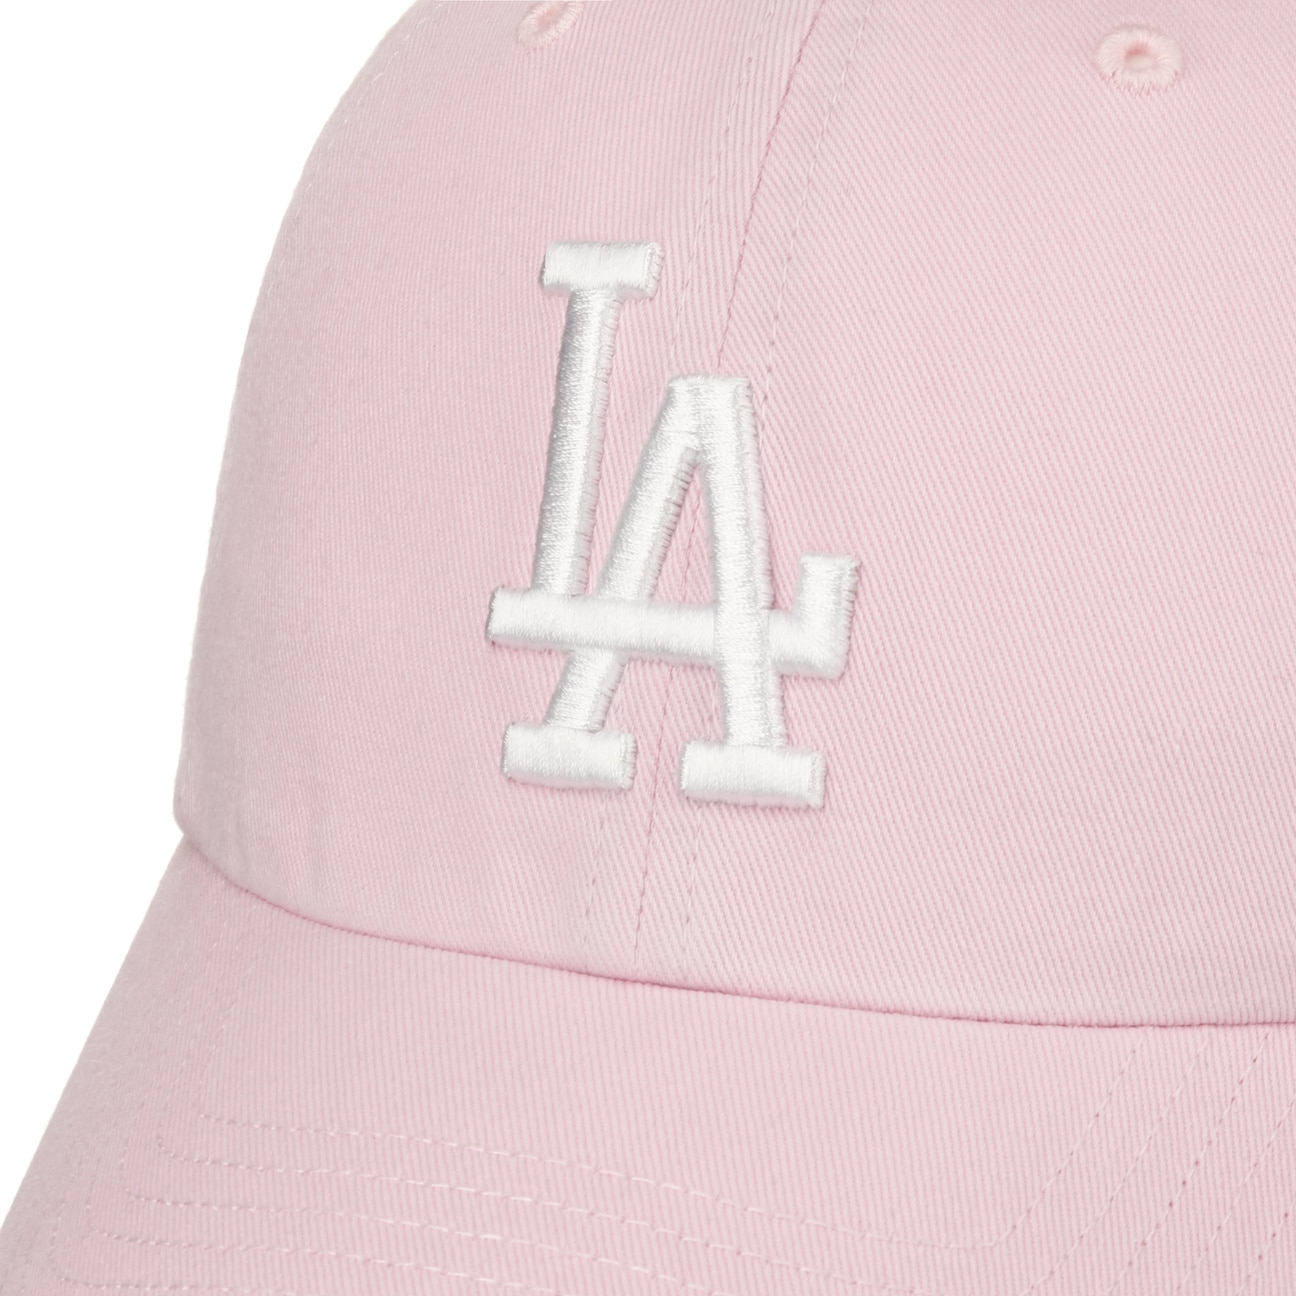 47 Brand Los Angeles Dodgers World 7X Series Champions Clean Up